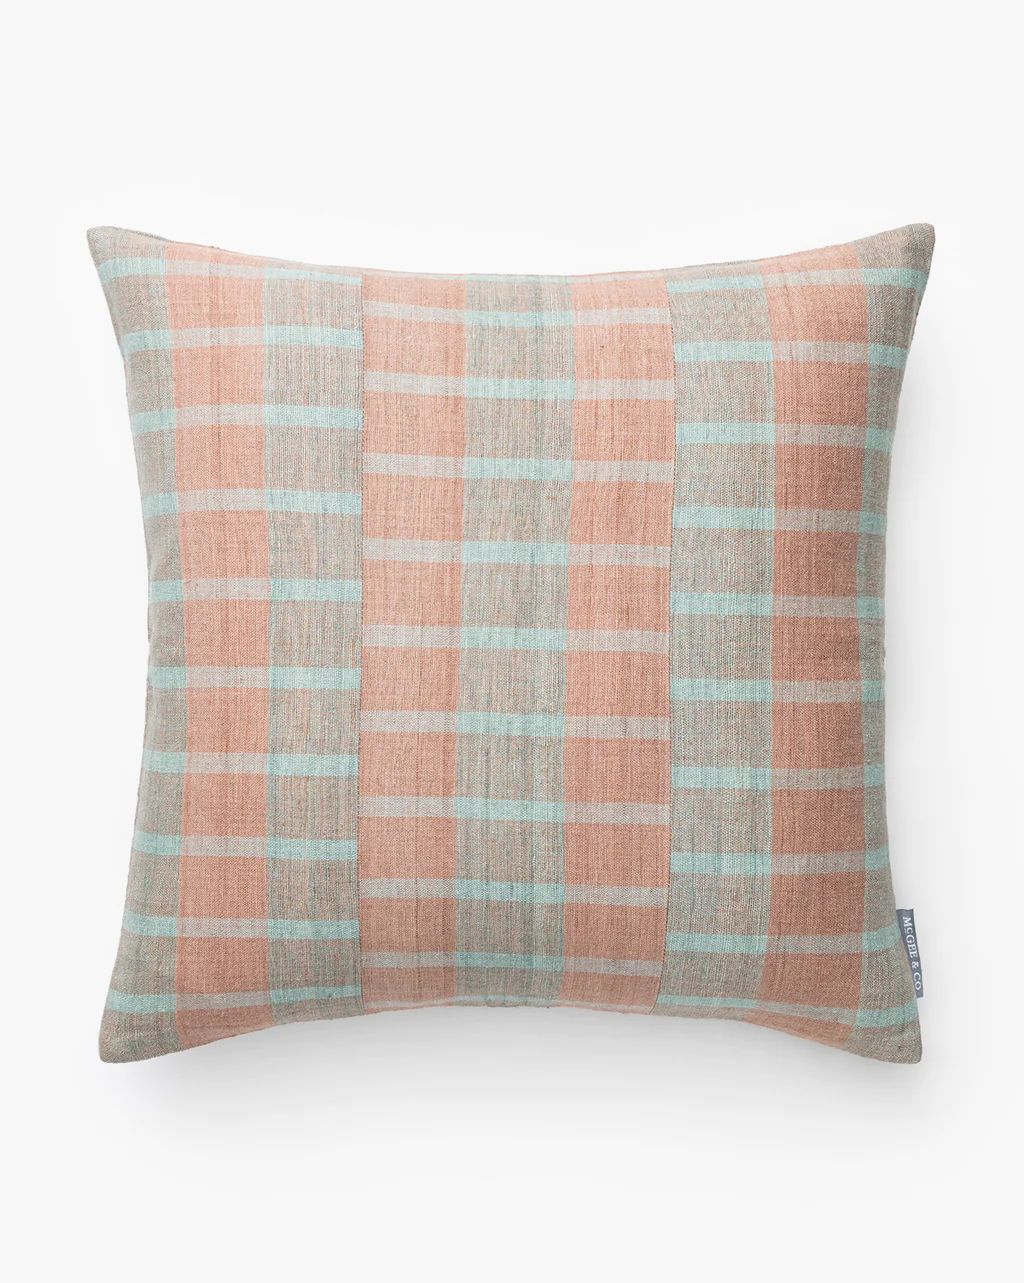 Flannery Pillow Cover | McGee & Co.